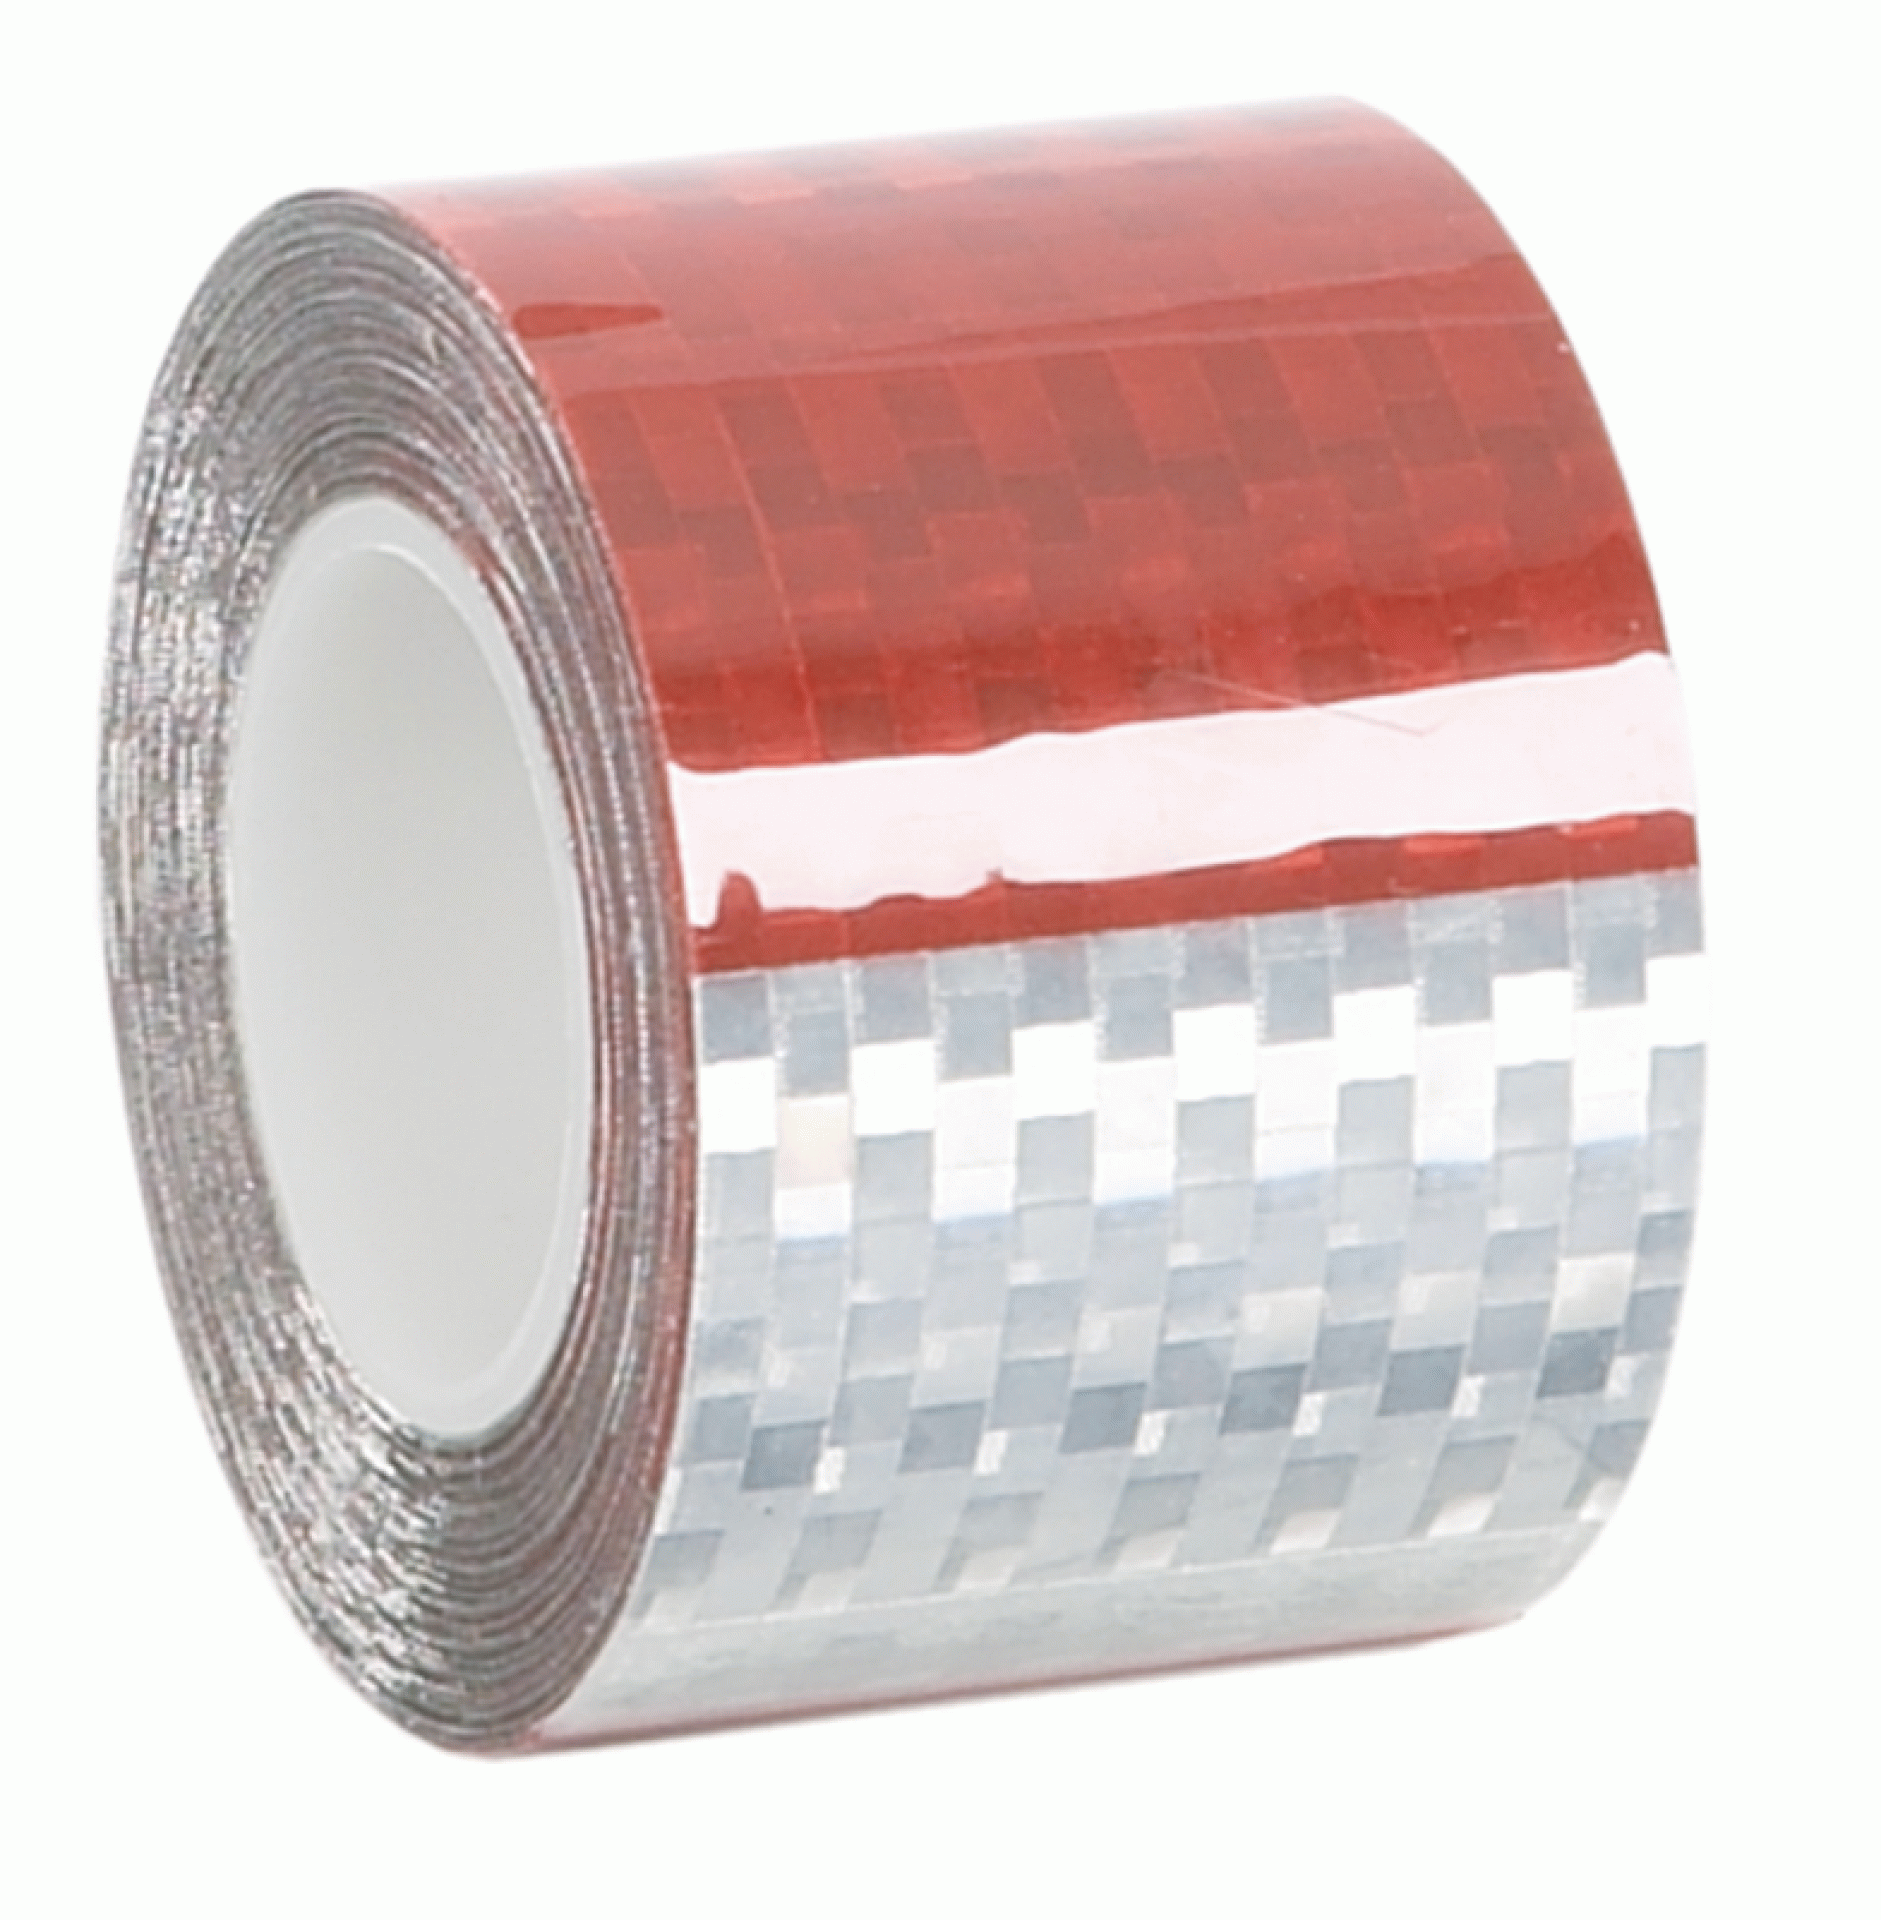 TOP TAPE / INCOM | RE2125 | REFLECTOR TAPE 2" X 25' RED/ SILVER